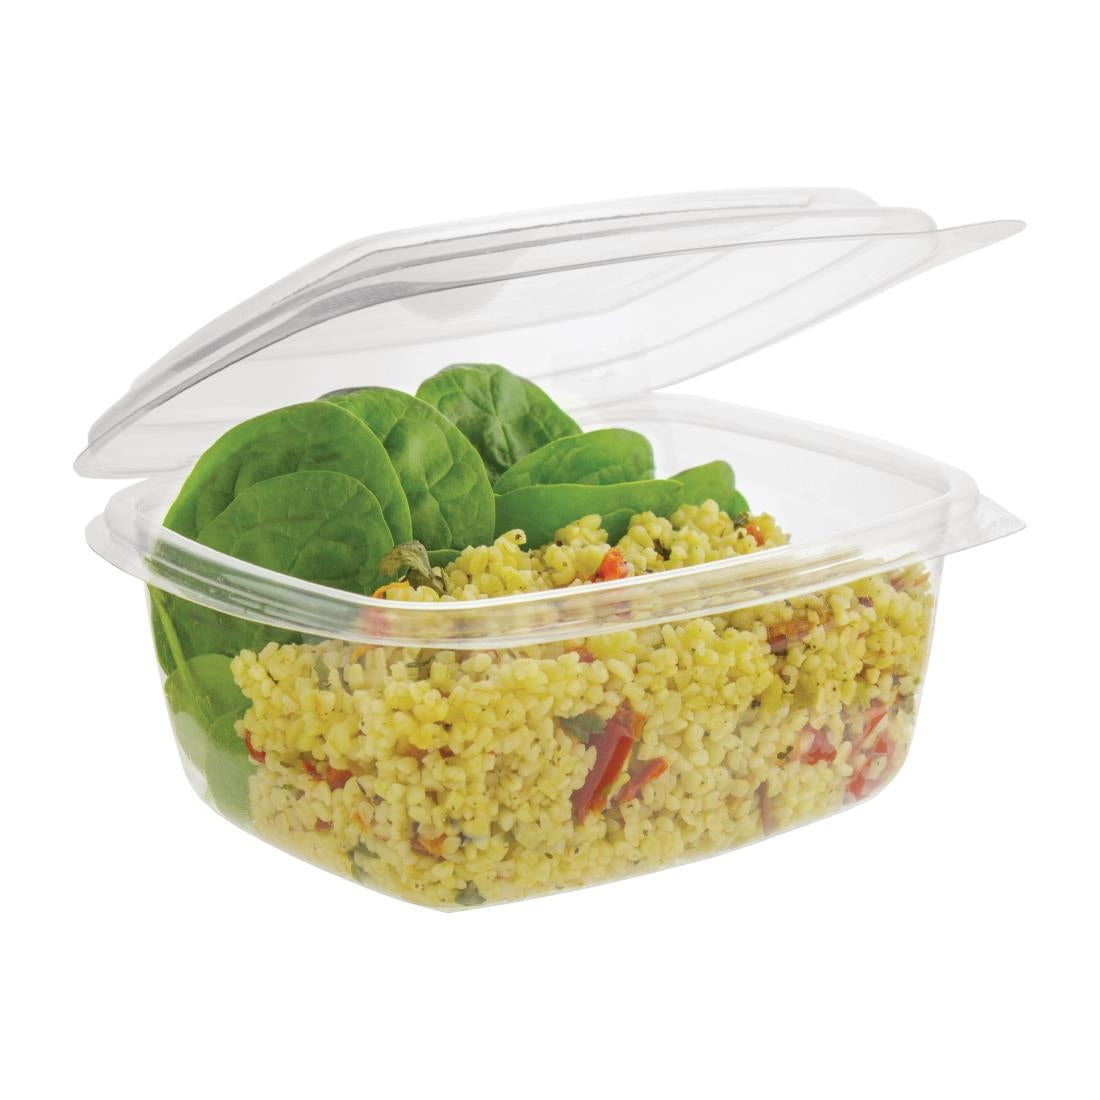 Vegware Compostable PLA Hinged-Lid Deli Containers 473ml / 16oz (Pack of 300)